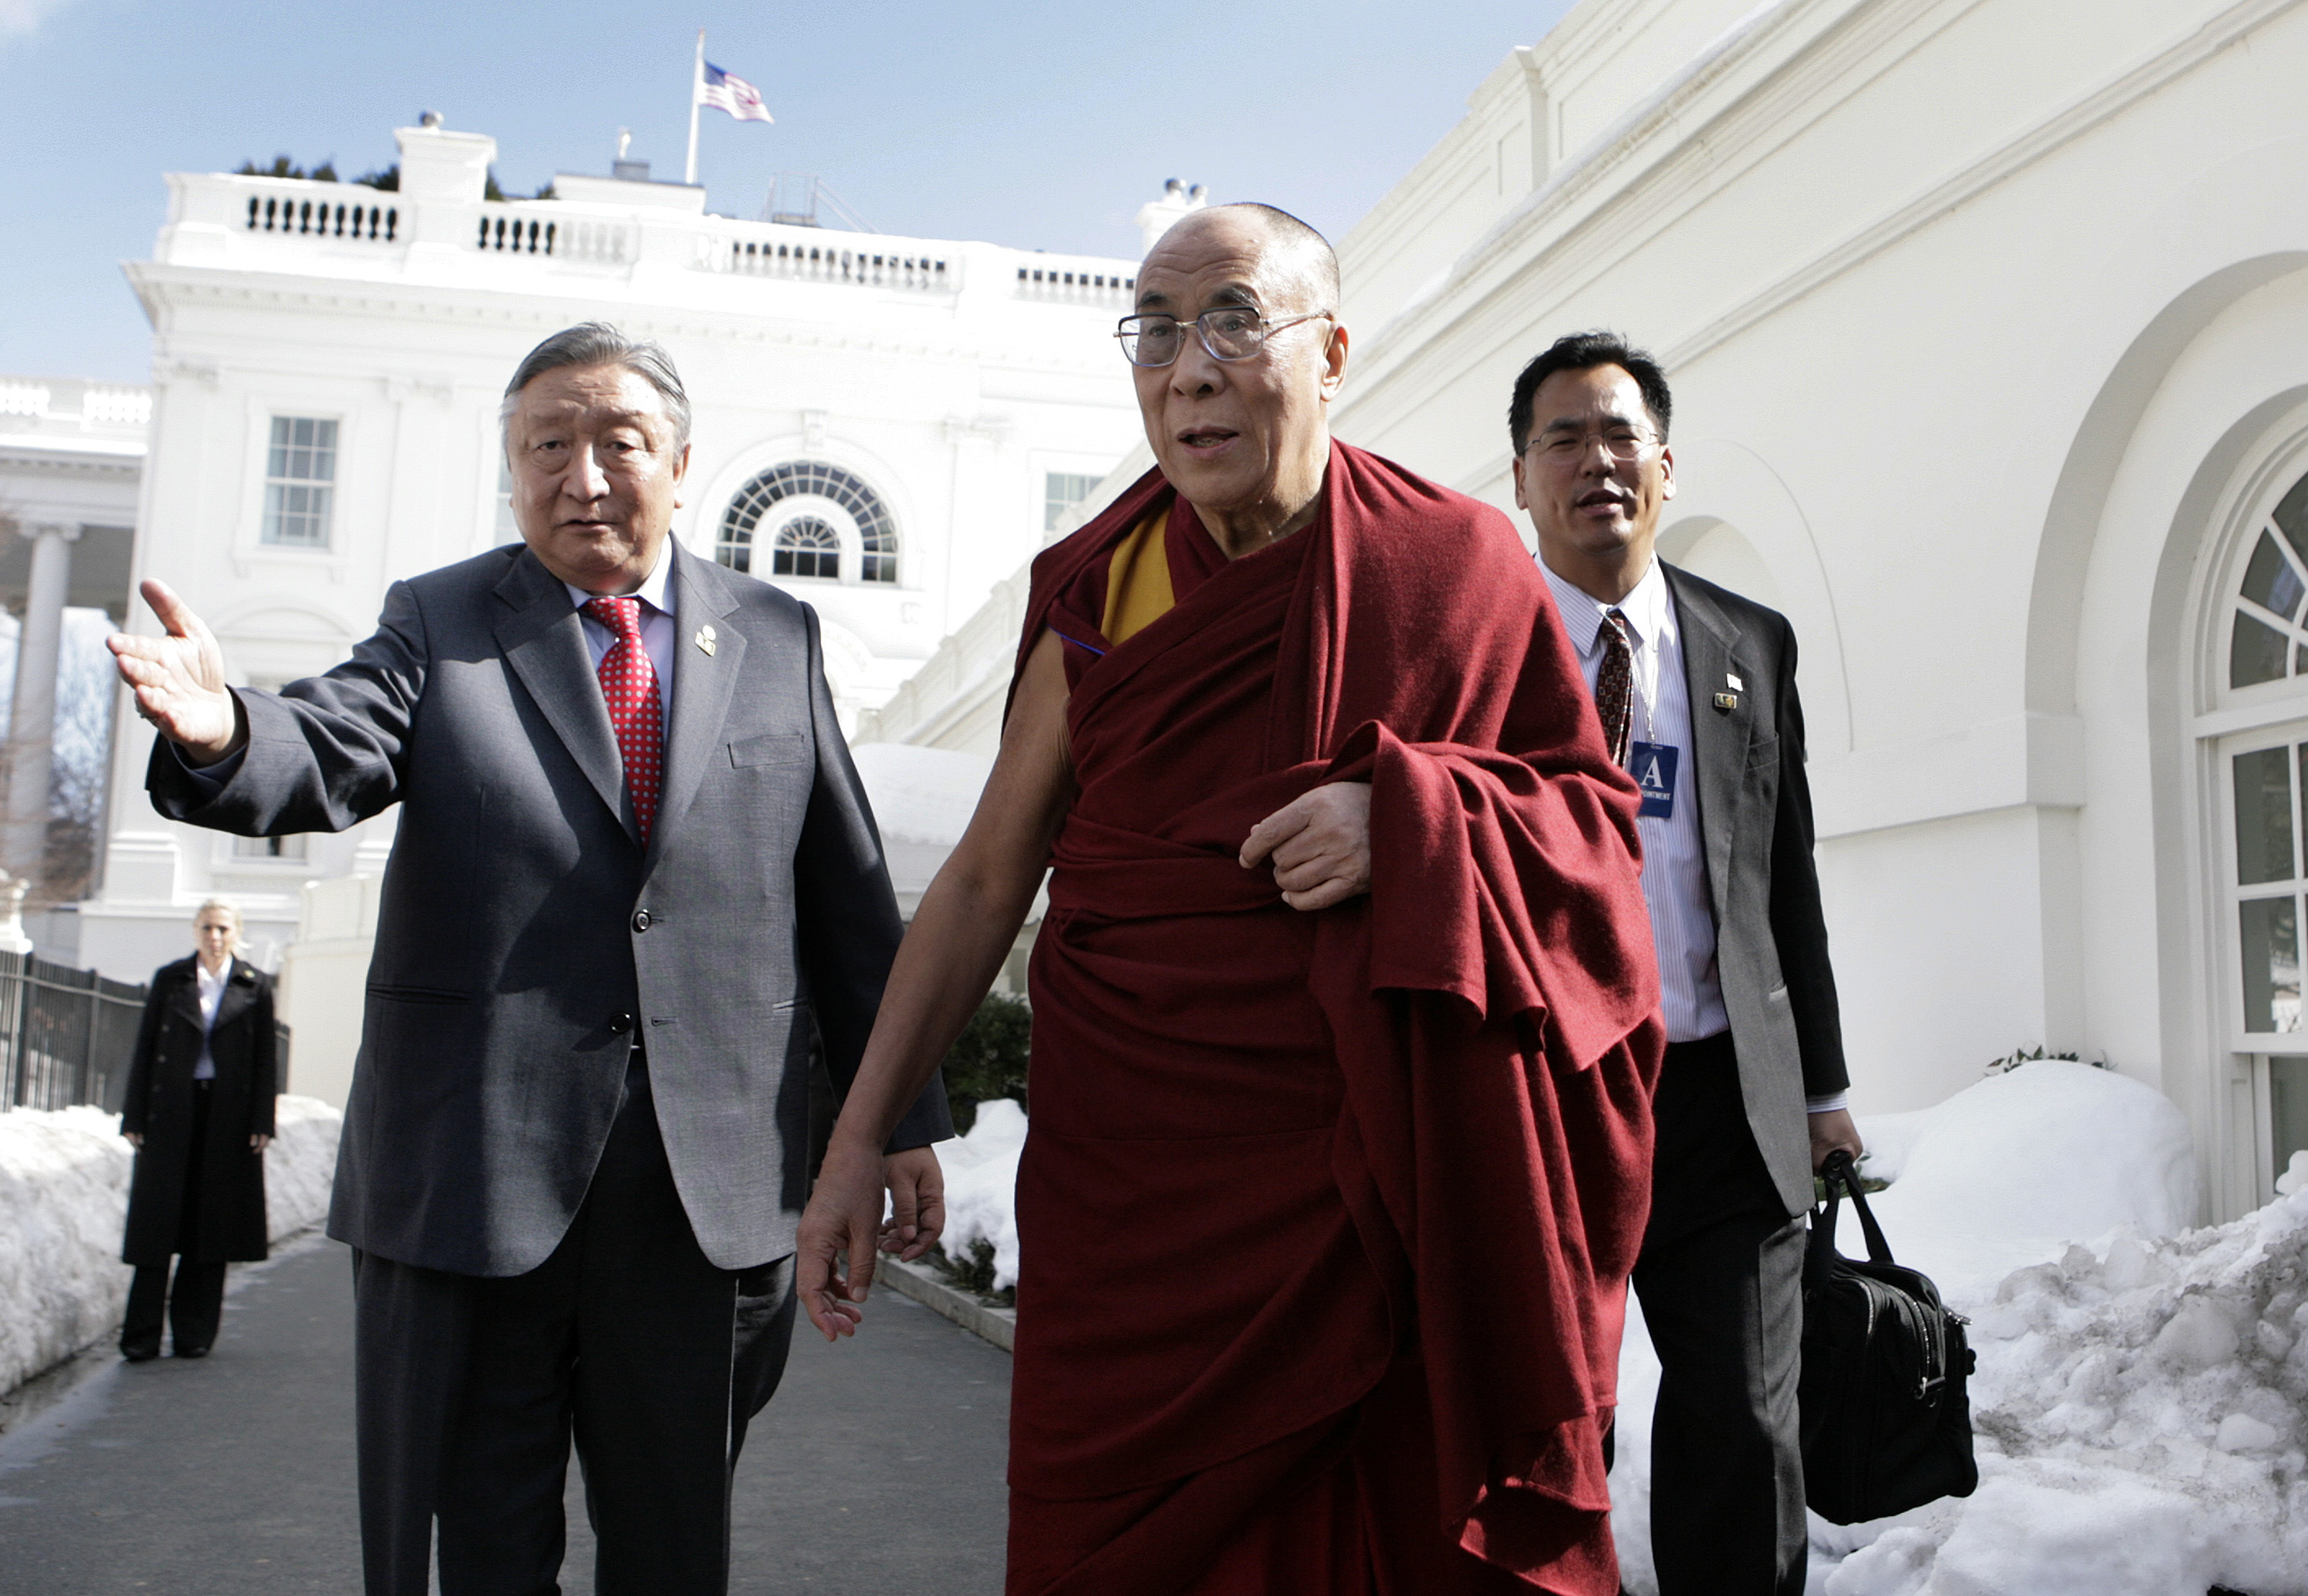 The Dalai Lama talks to the media after a meeting with President Barack Obama in Washington